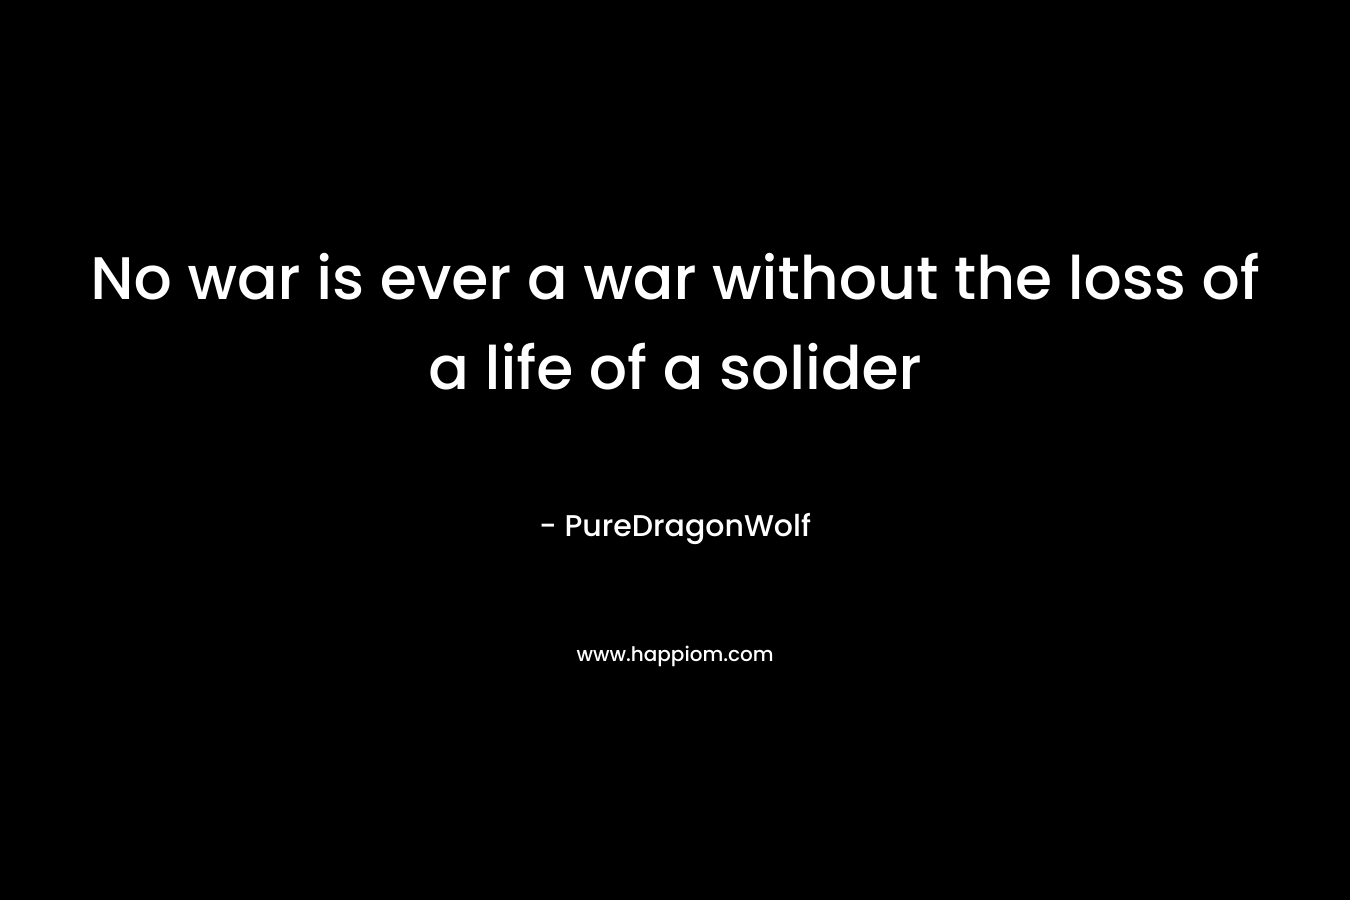 No war is ever a war without the loss of a life of a solider – PureDragonWolf